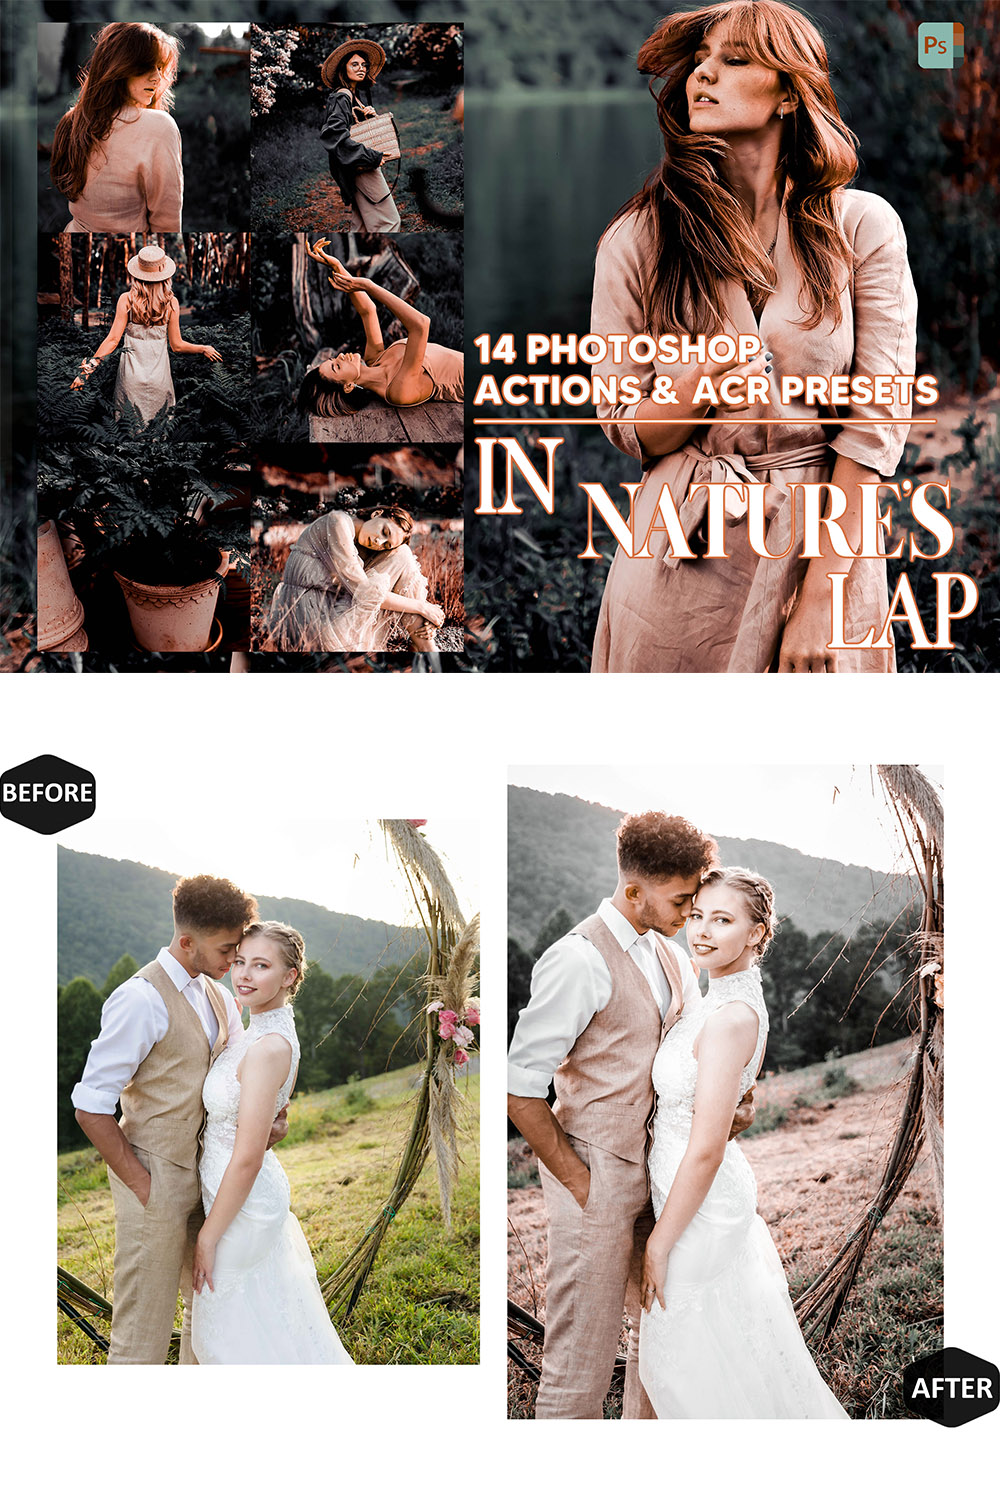 14 Photoshop Actions, In Nature’s Lap Ps Action, Moody ACR Preset, Warm Ps Filter, Atn Portrait And Lifestyle Theme For Instagram, Blogger pinterest preview image.